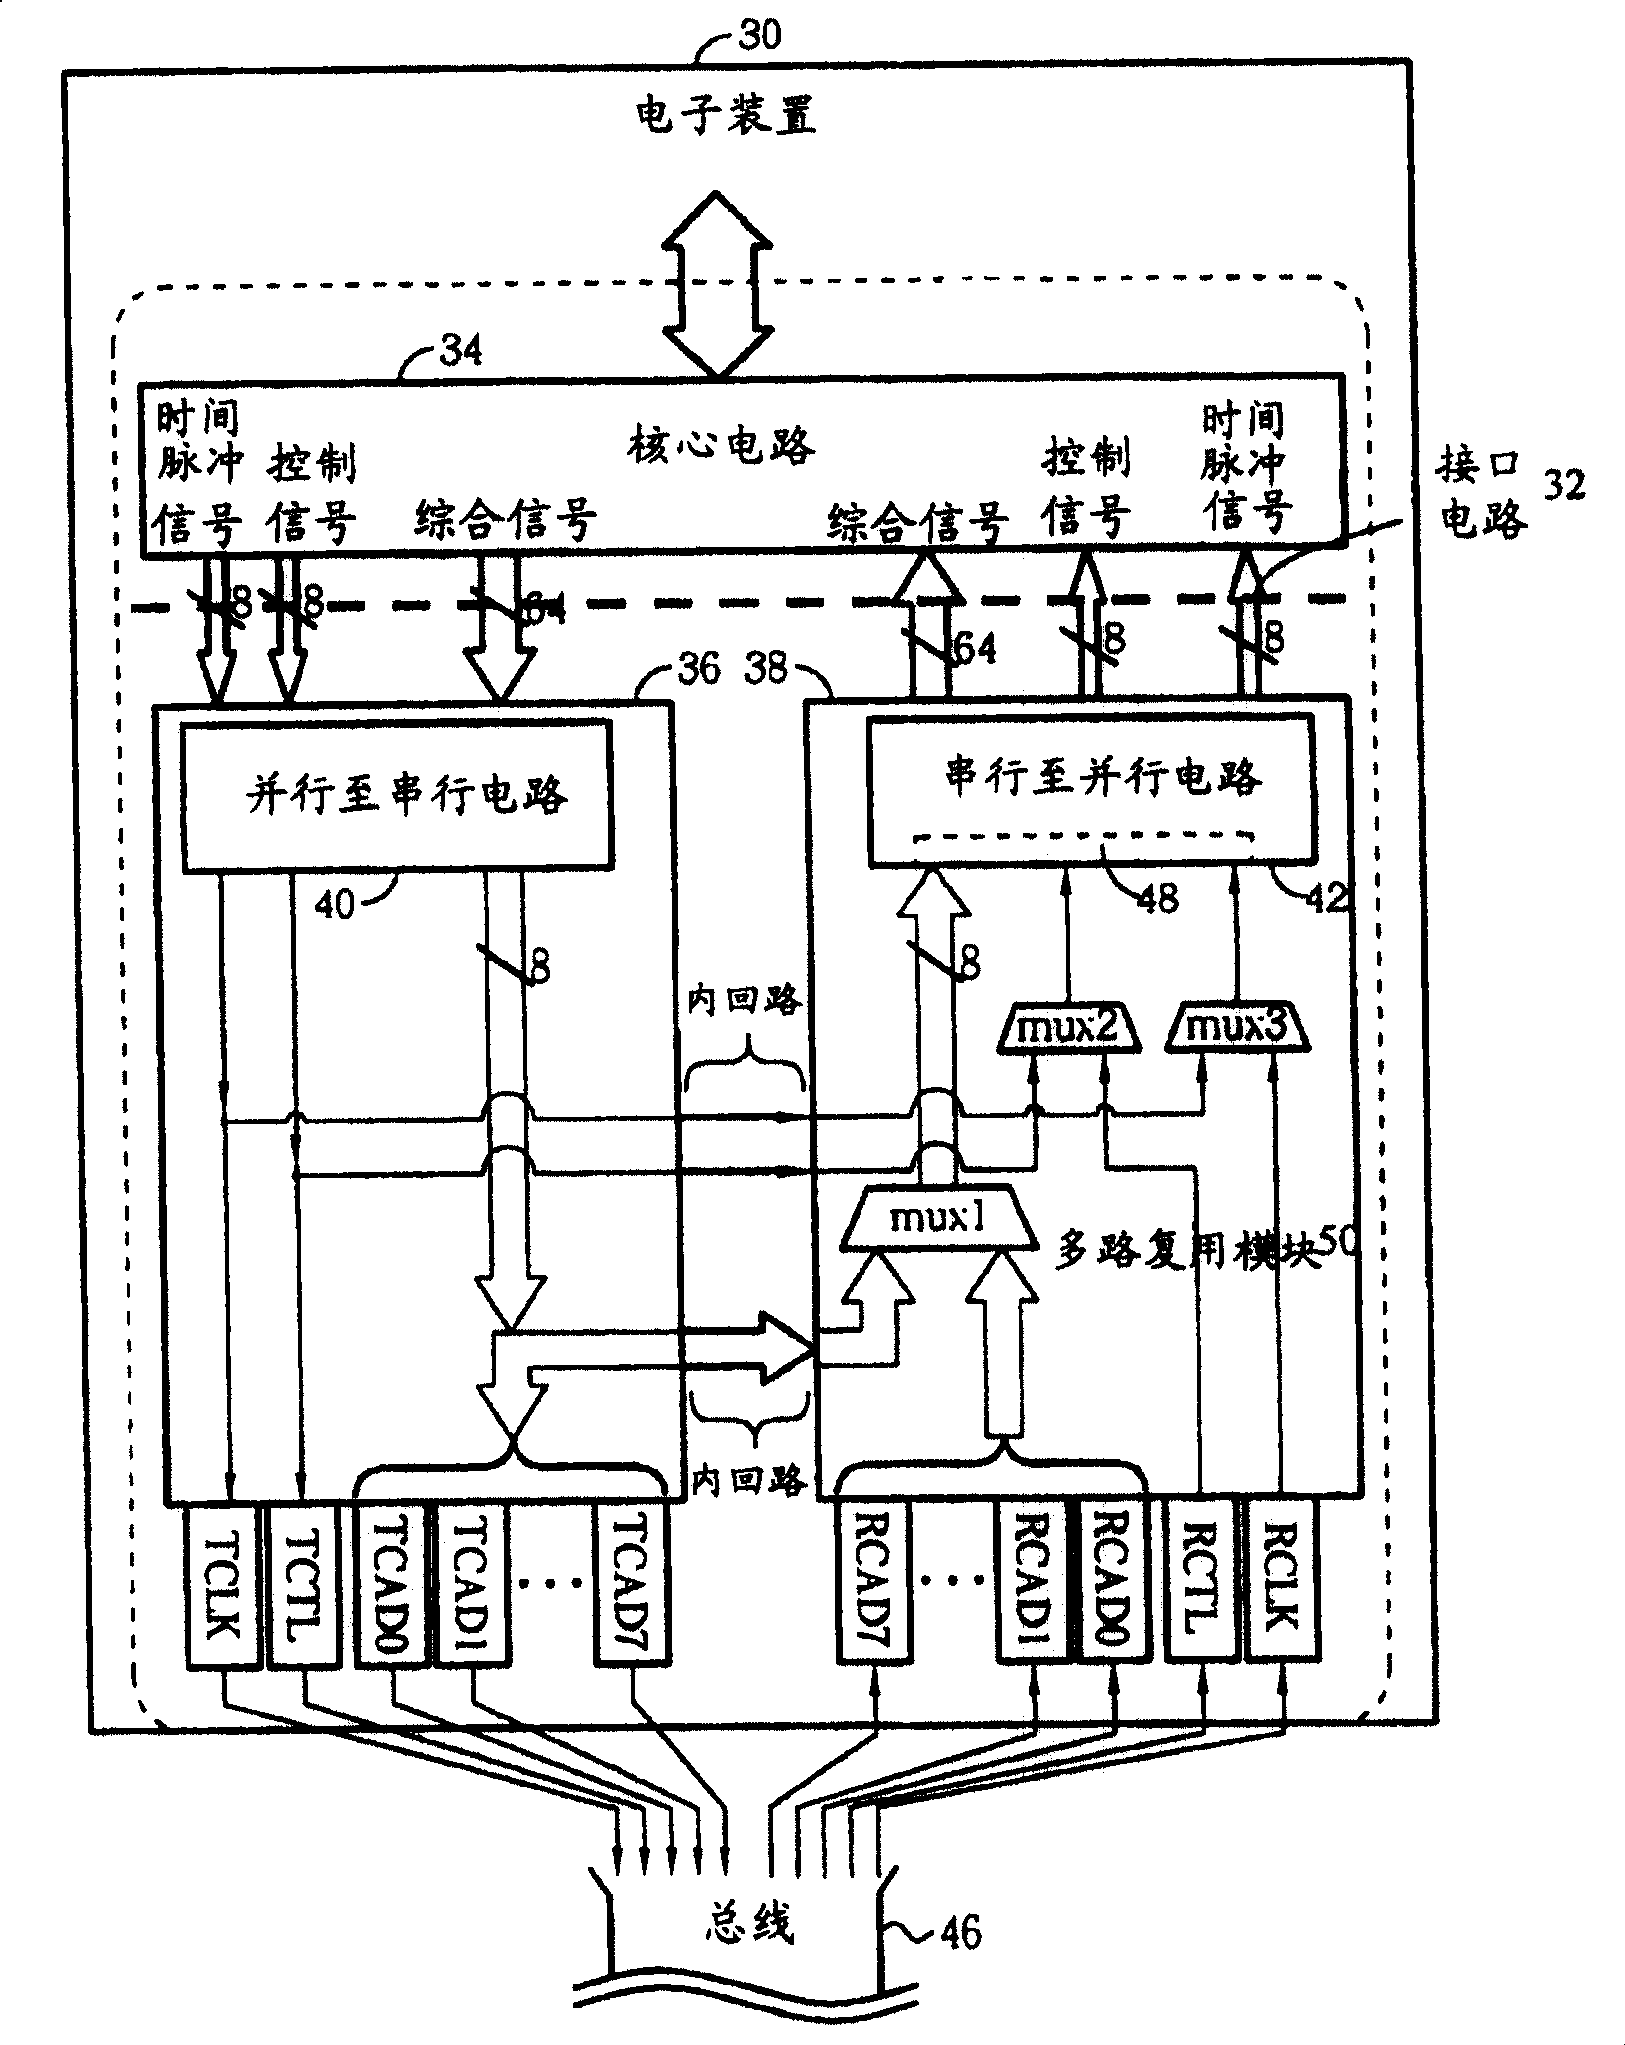 Chip testing mechanism and related method